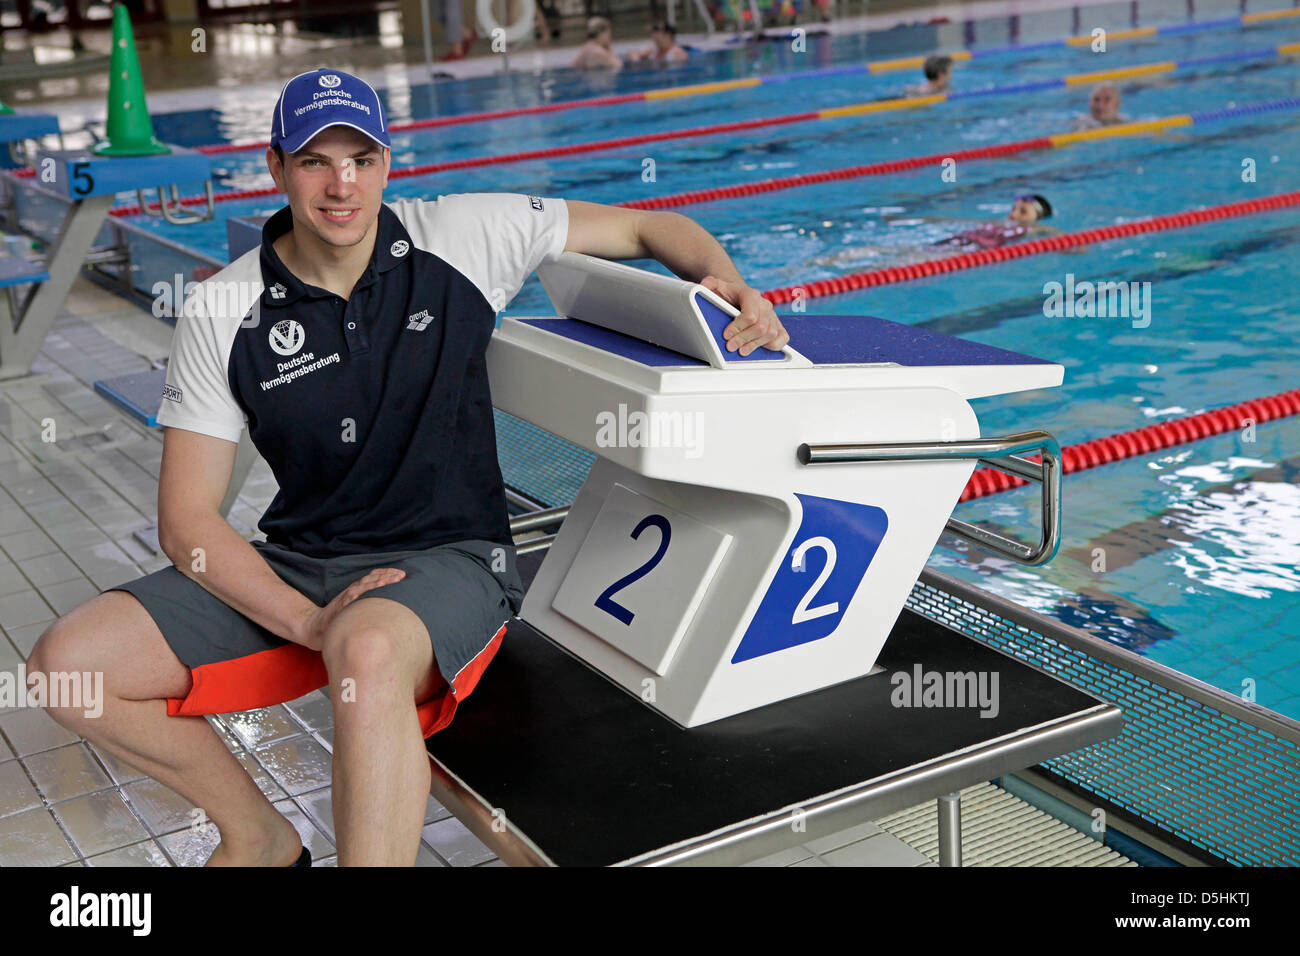 German swimming champion Paul Biedermann poses with his new starting block  in Halle Saale, Germany, 18 February 2010. The same type of starting block  was used at the Beijing 2008 Olympic Games